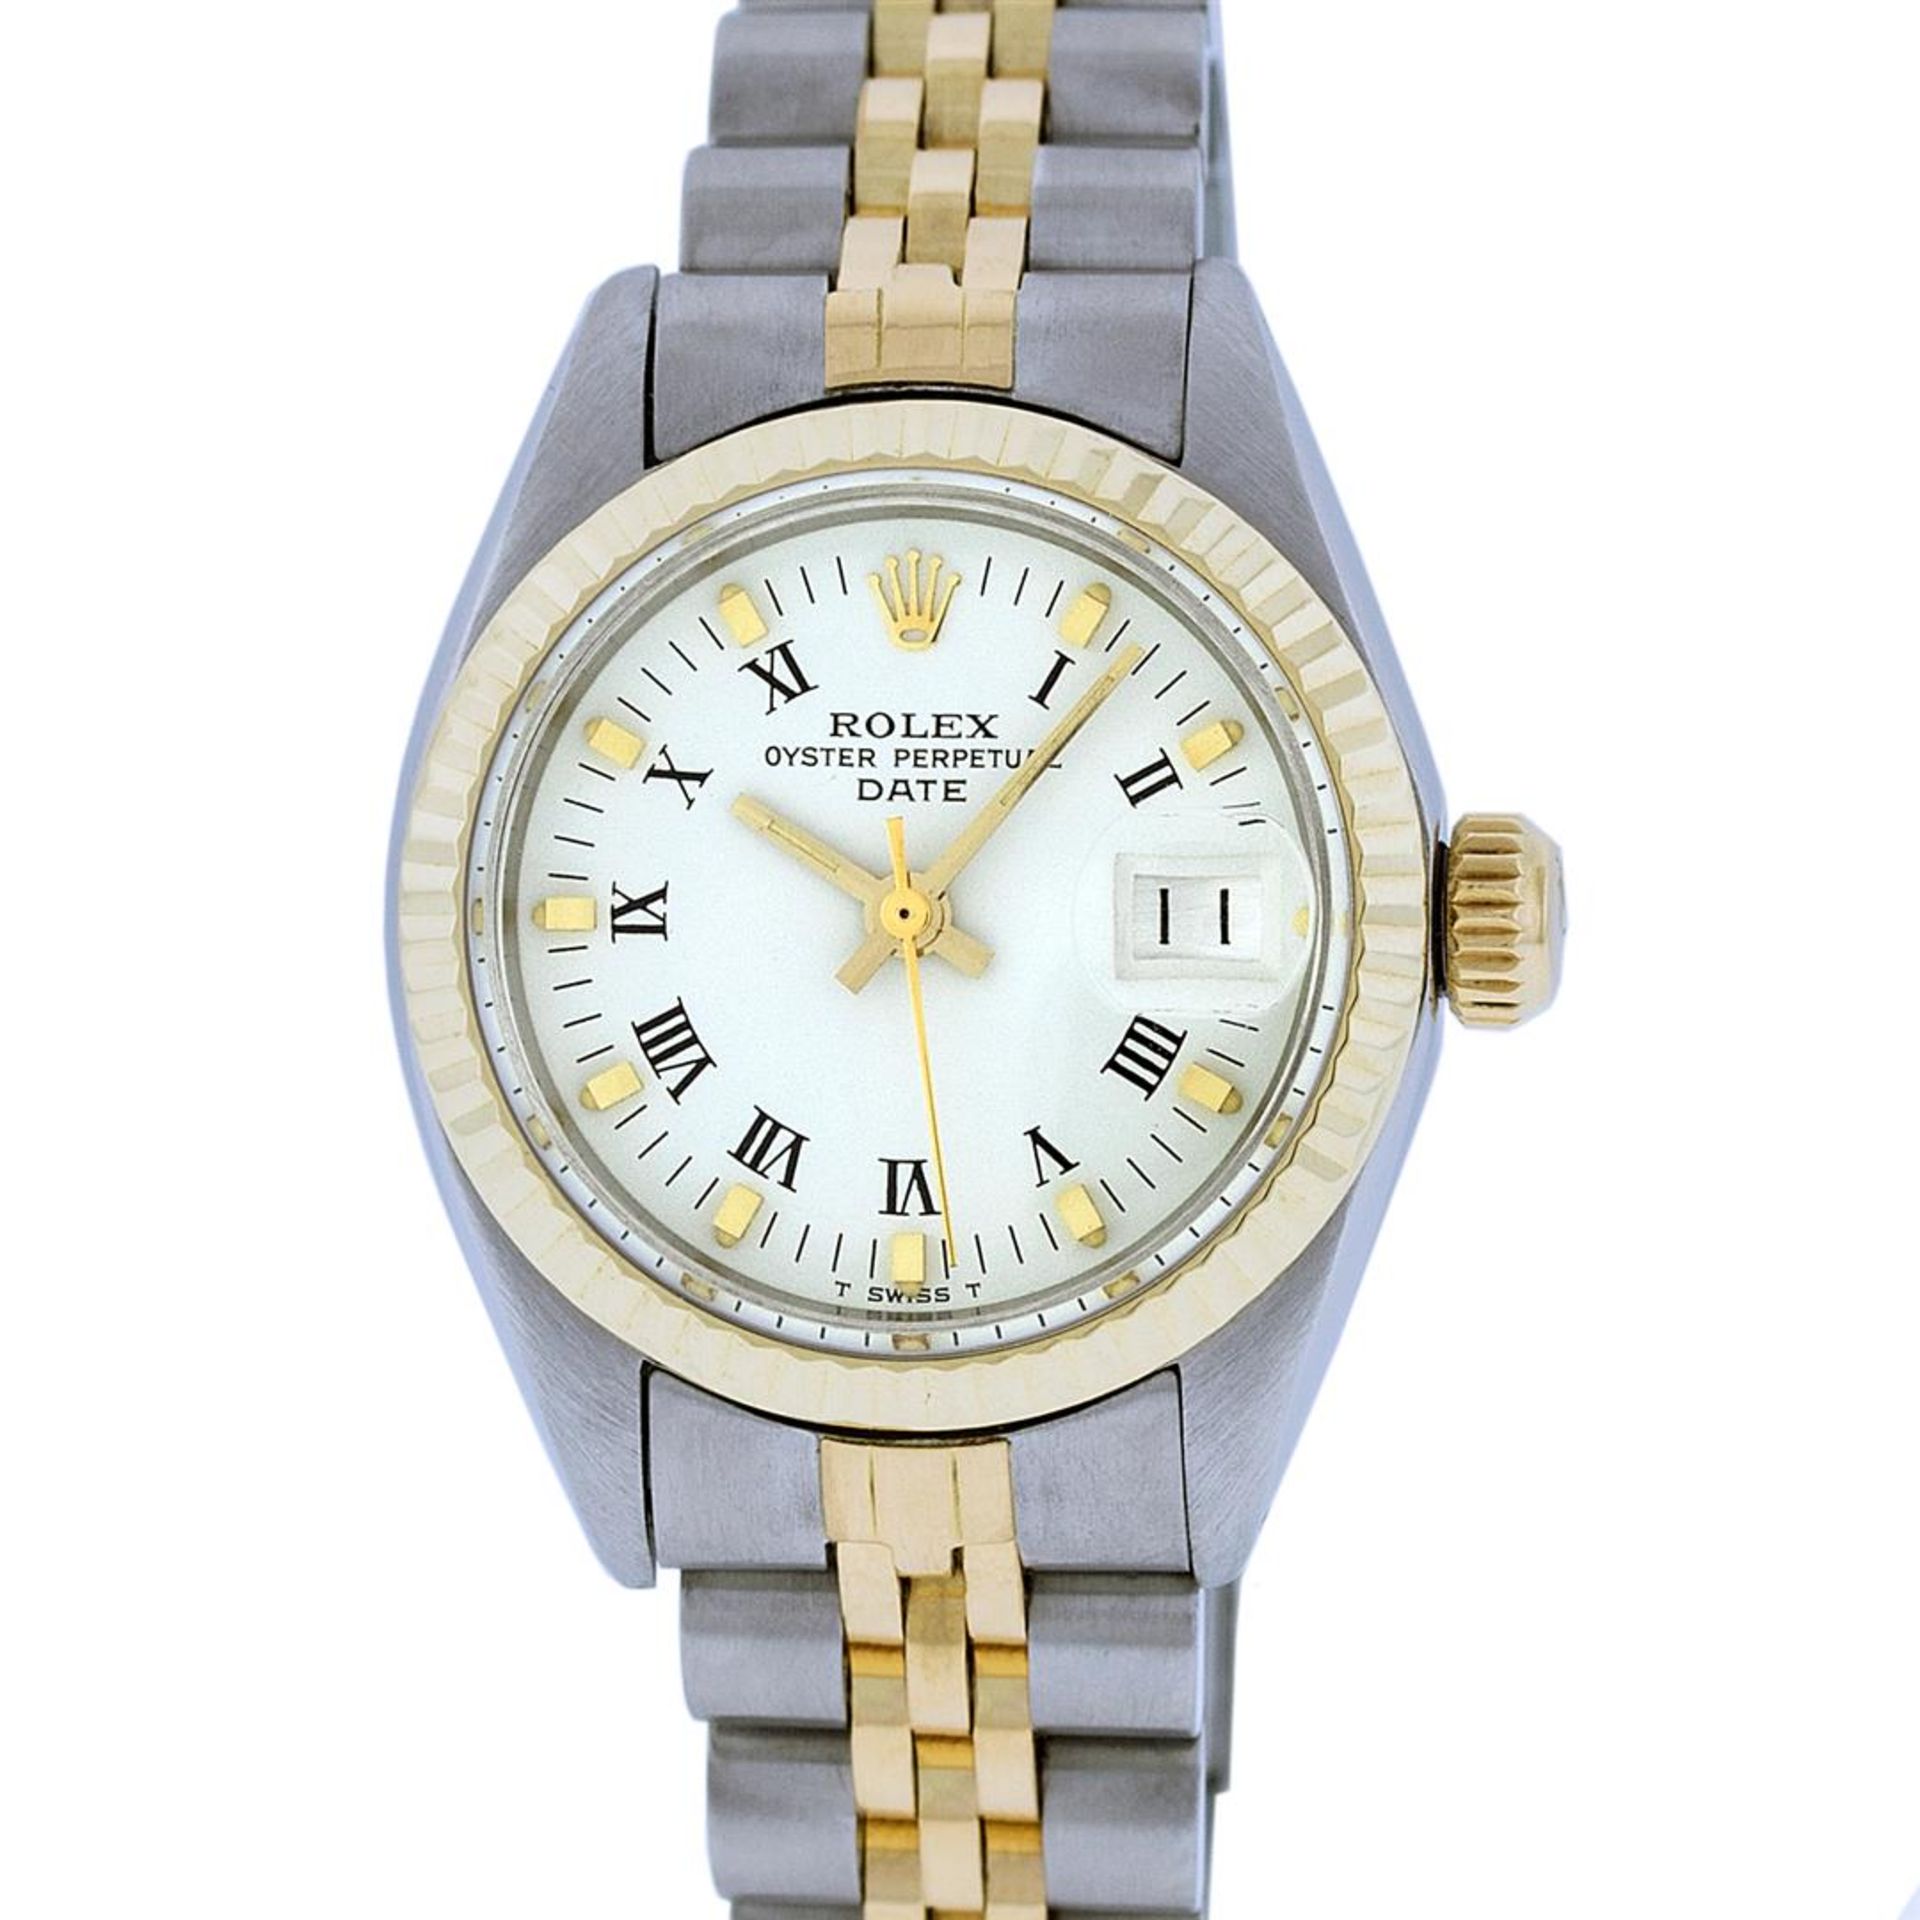 Rolex Ladies 2 Tone White Index 26MM Fluted Bezel Oyster Perpetual Datejust - Image 5 of 9